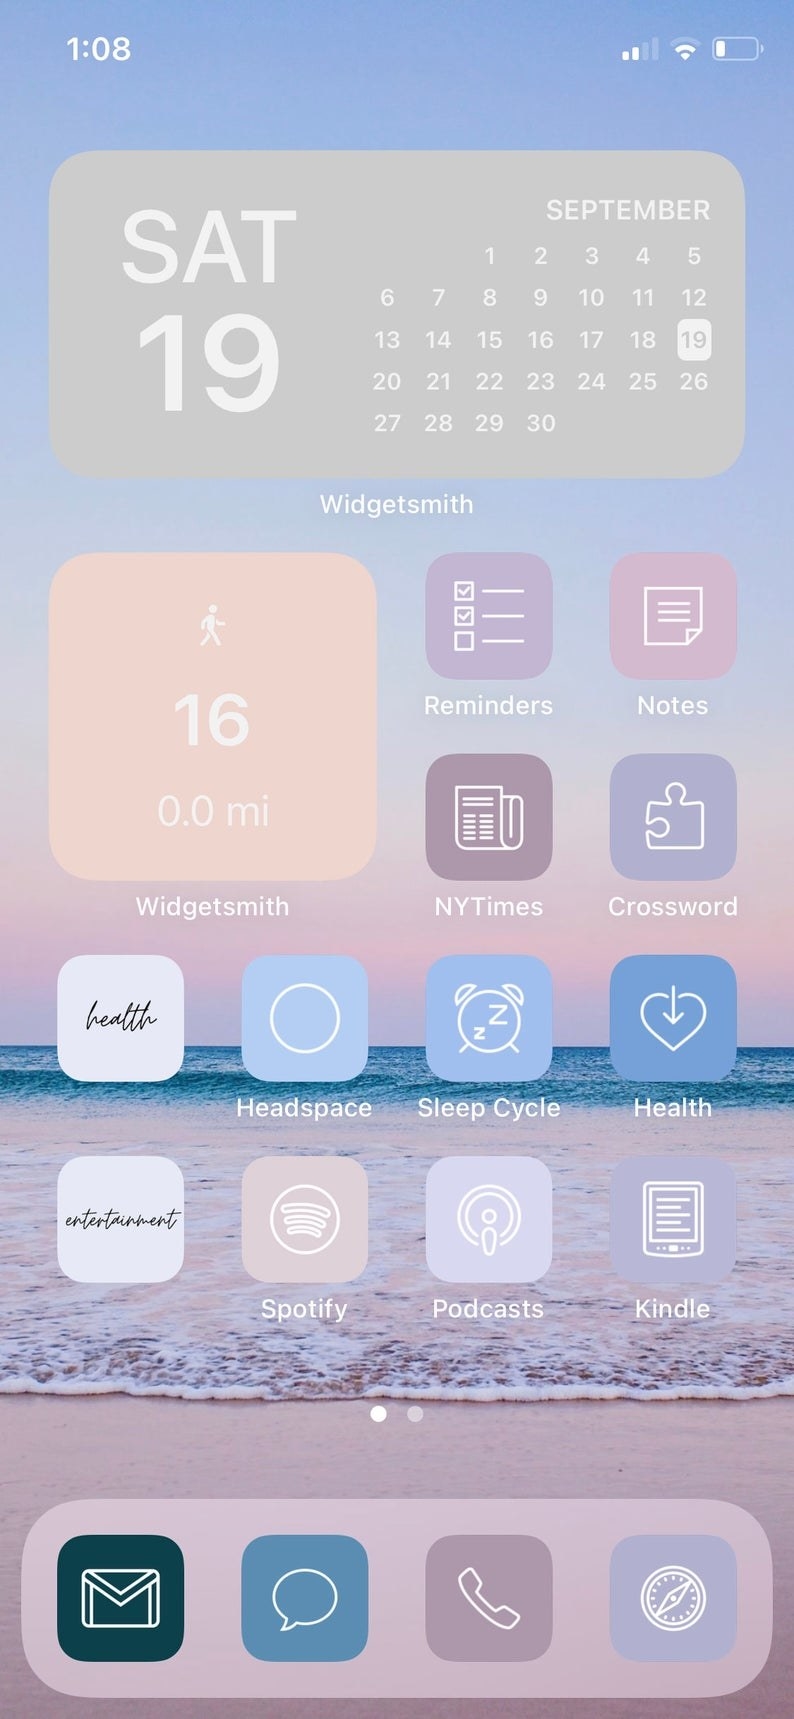 Ios14 Aesthetic App Icon Themes See more ideas about icon, ios icon, app icon design. ios14 aesthetic app icon themes